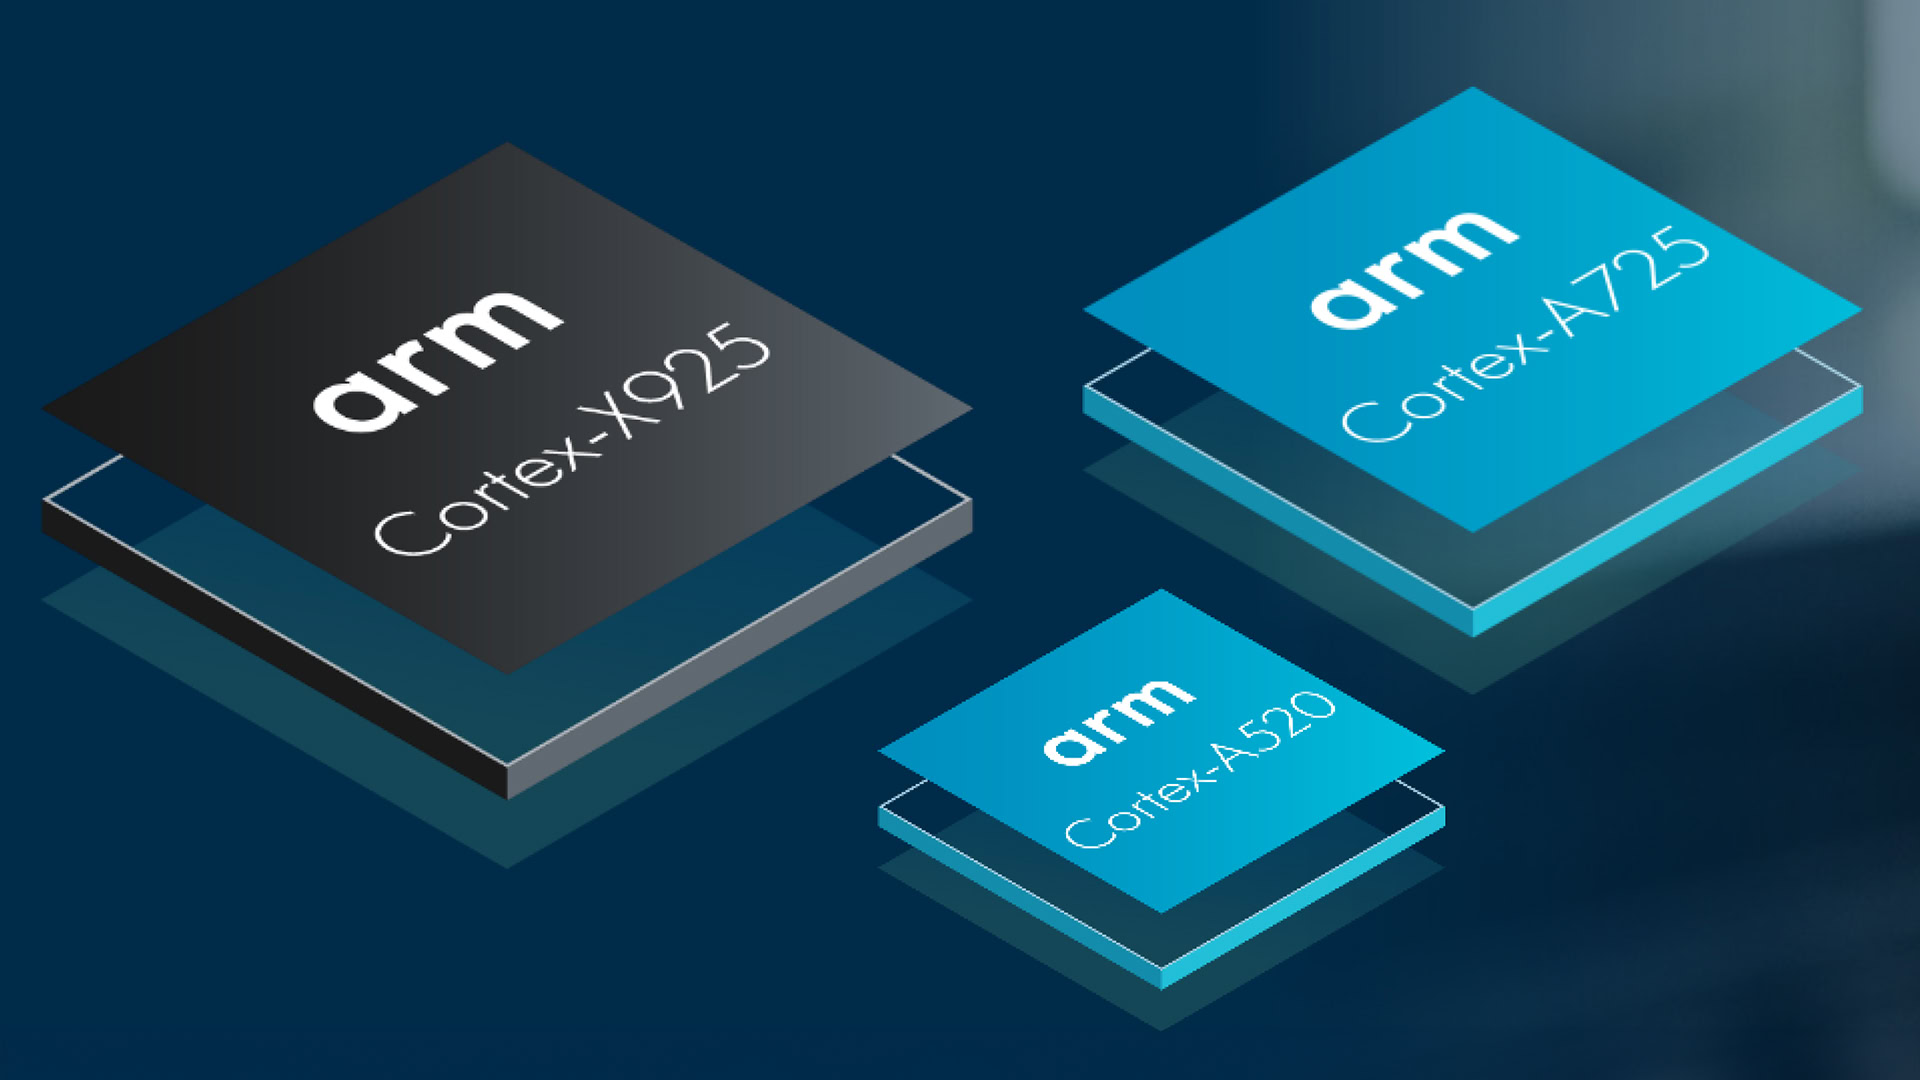 Deep dive into Arm’s new Cortex-G925 and Immortalis-G952 for cell